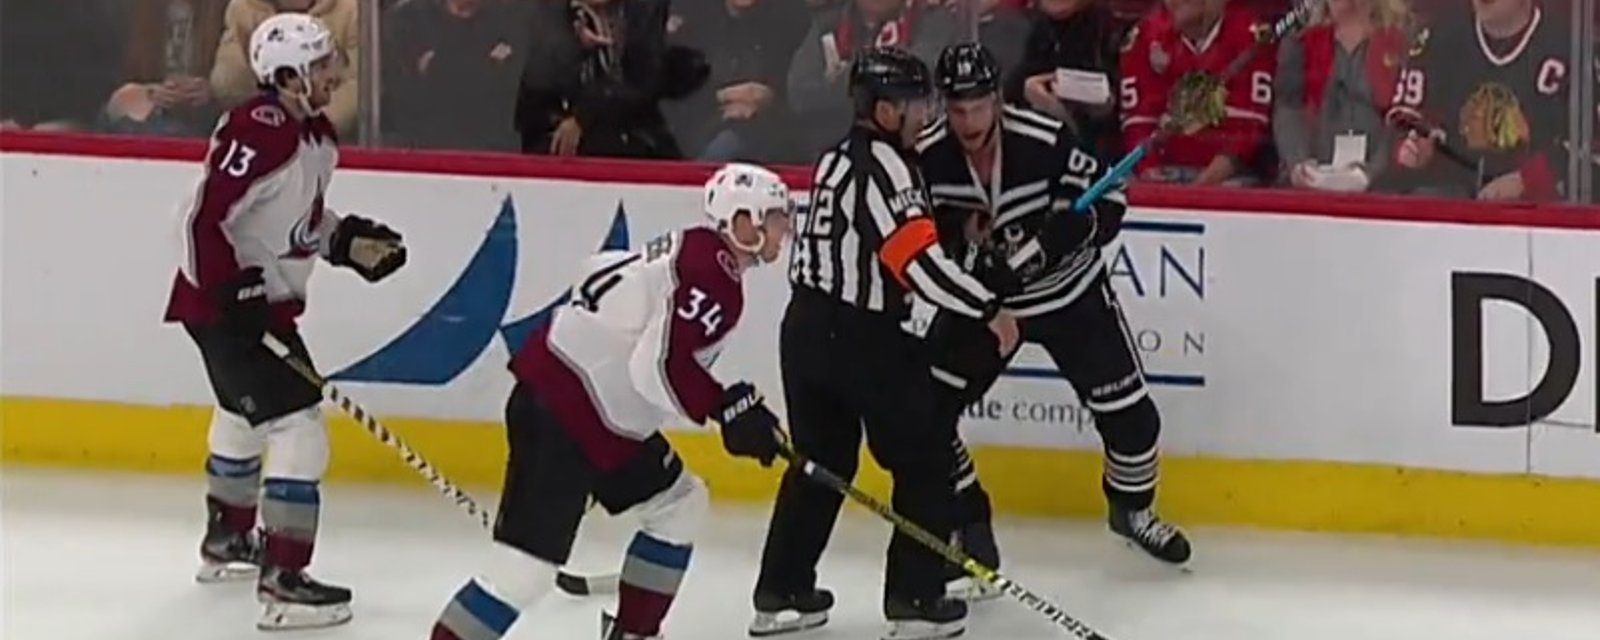 Jonathan Toews nearly slashes referee Justin St. Pierre in frustration.